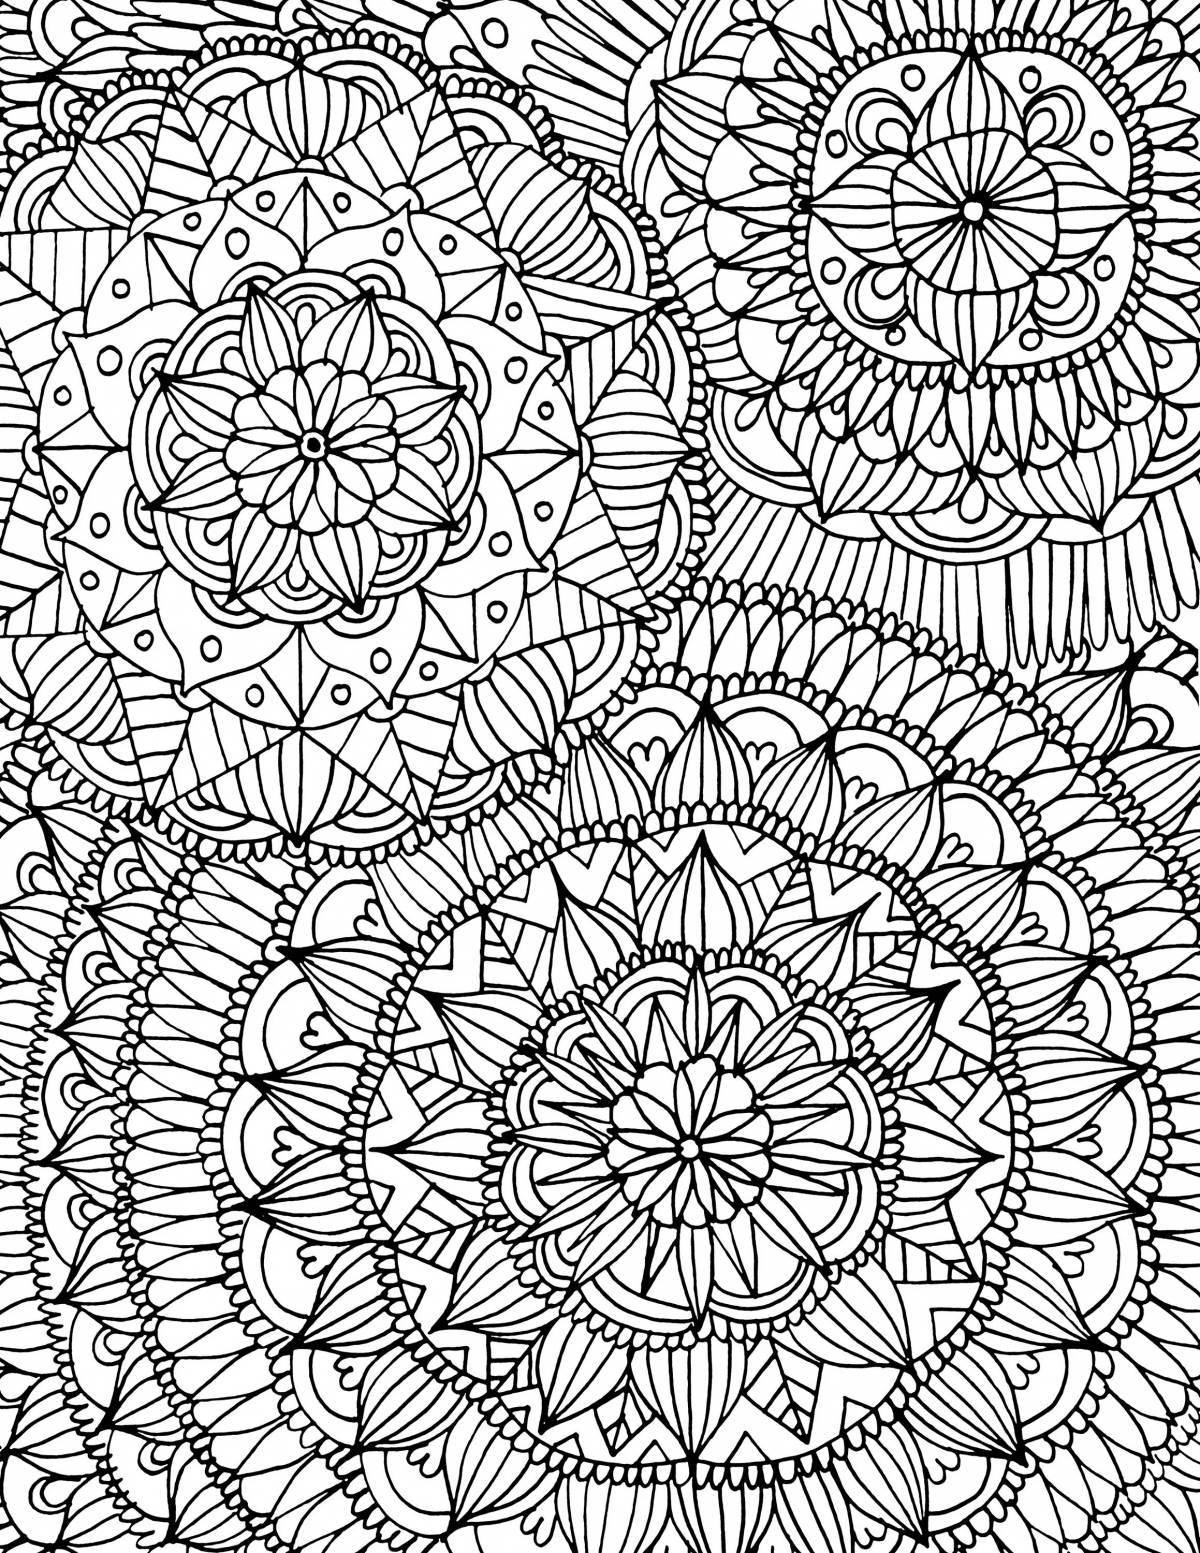 Revitalizing coloring for relaxation of the nervous system